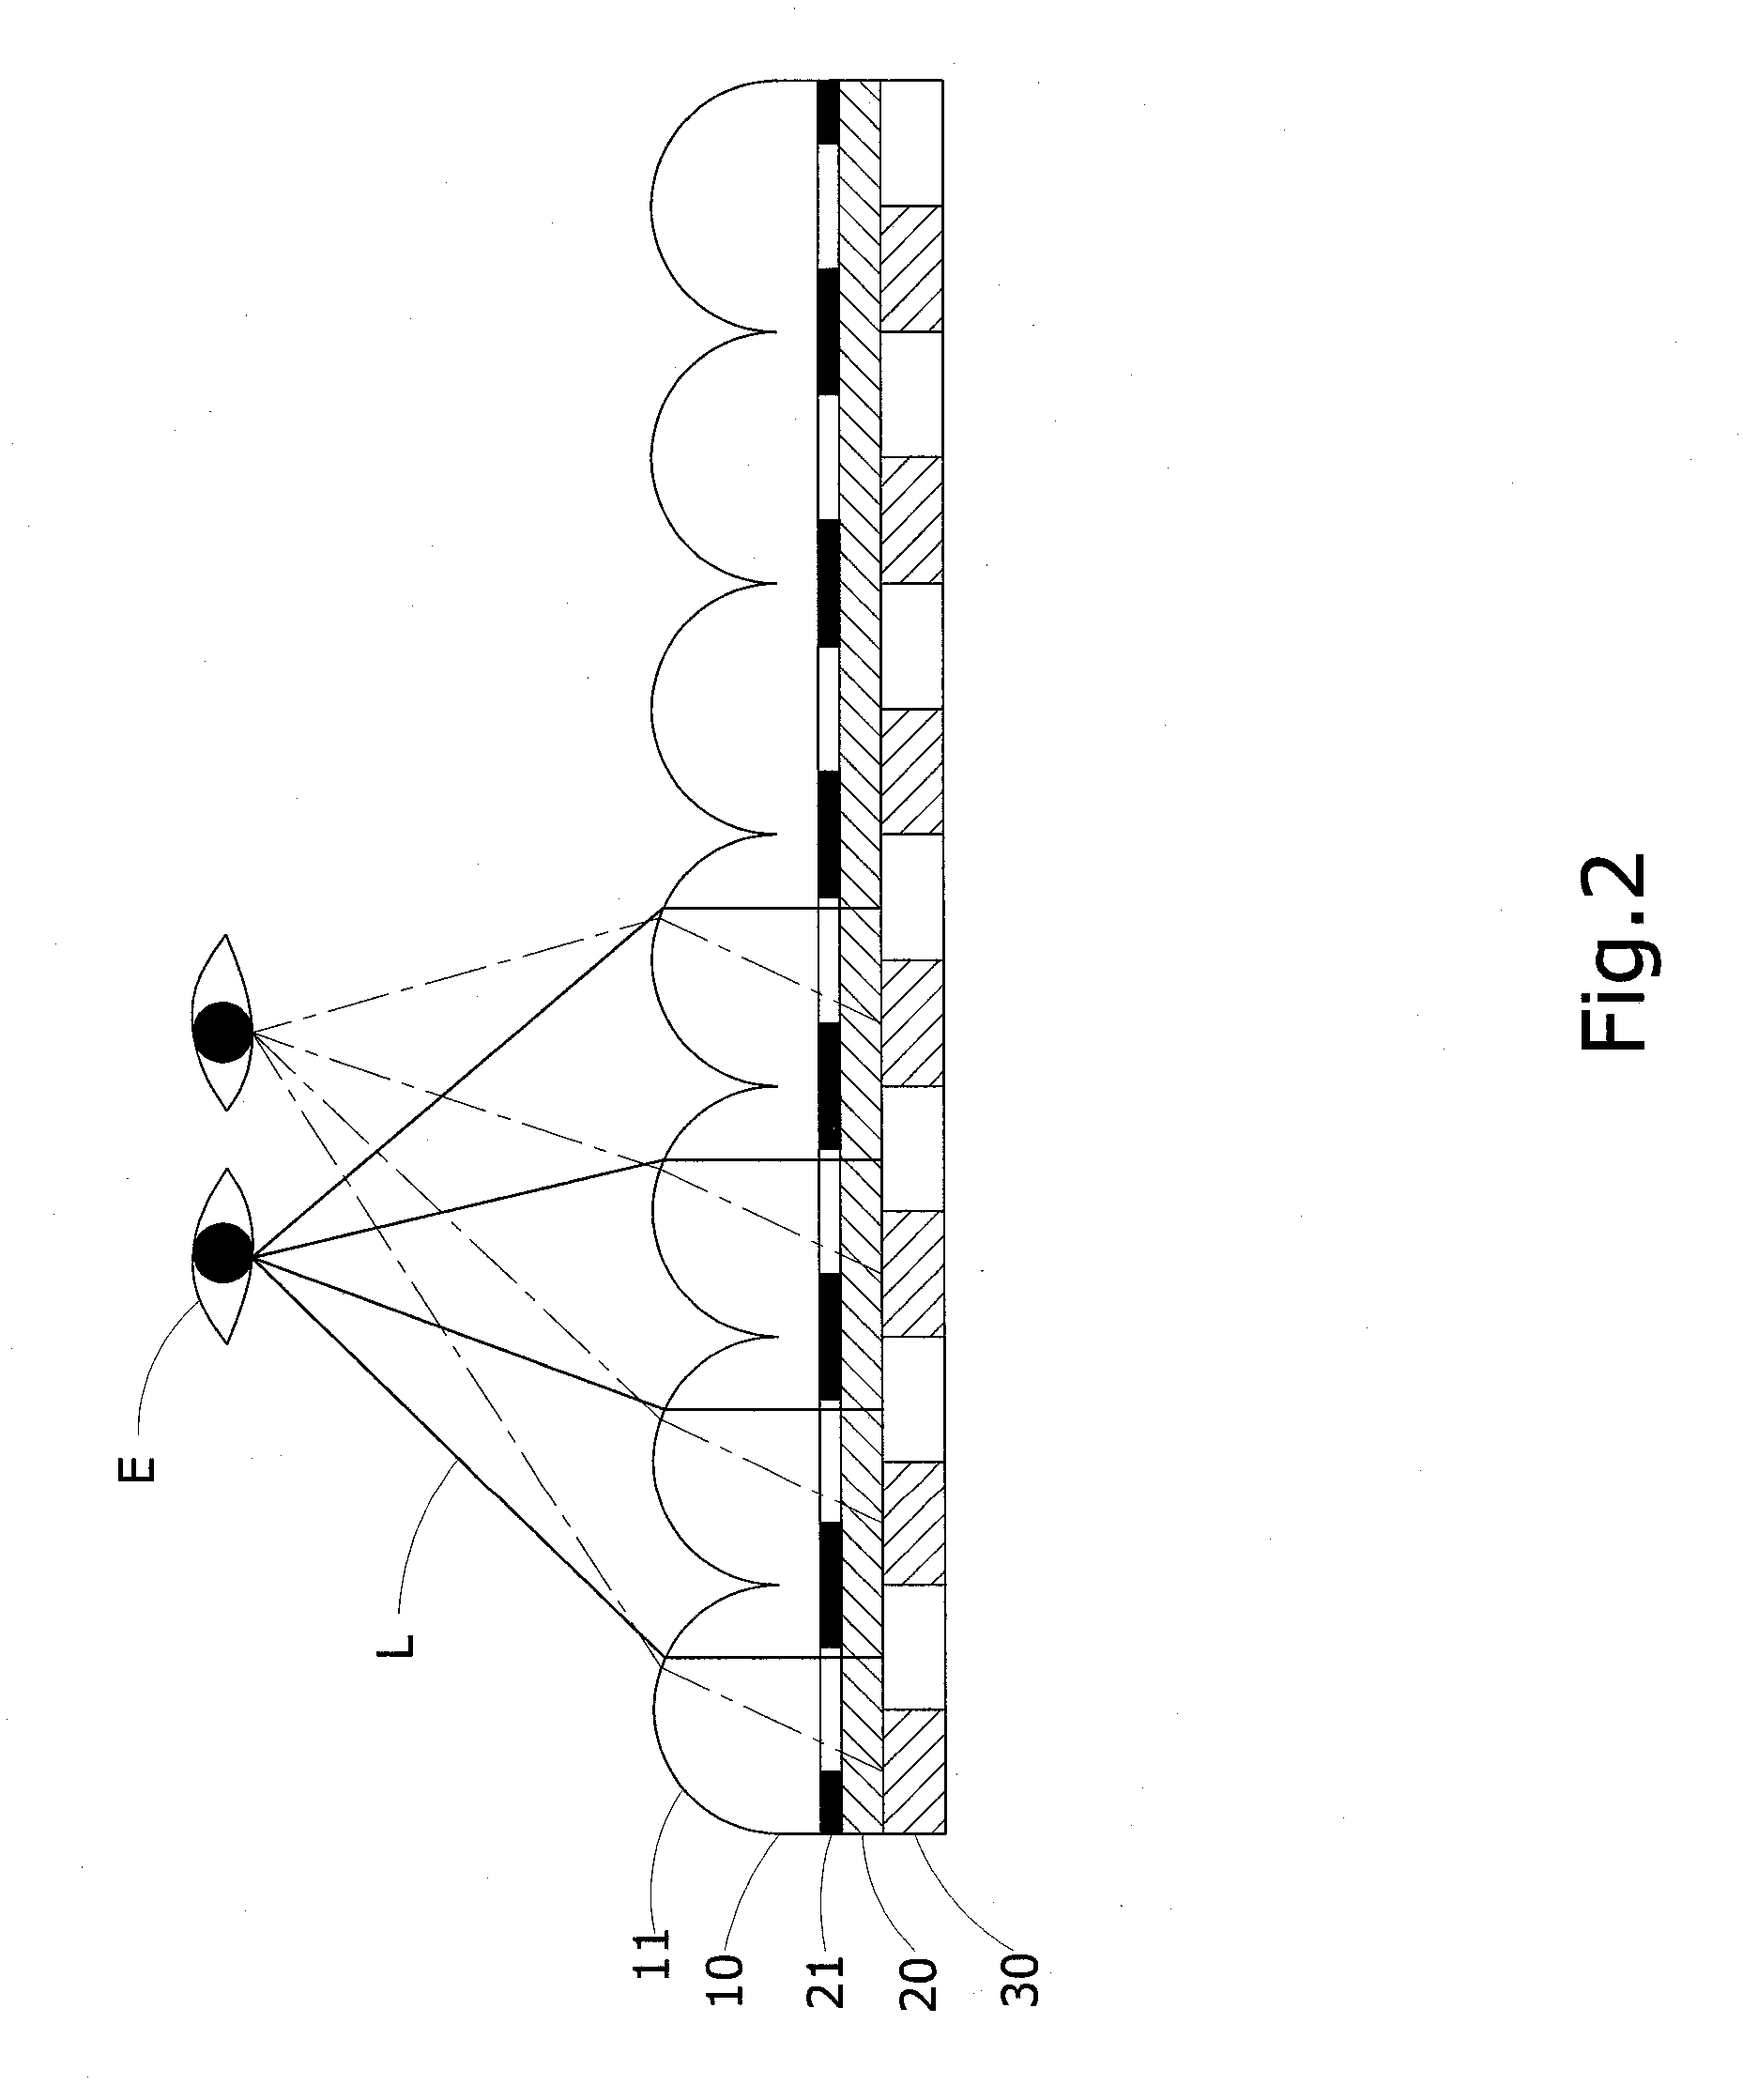 Three-dimensional video imaging device